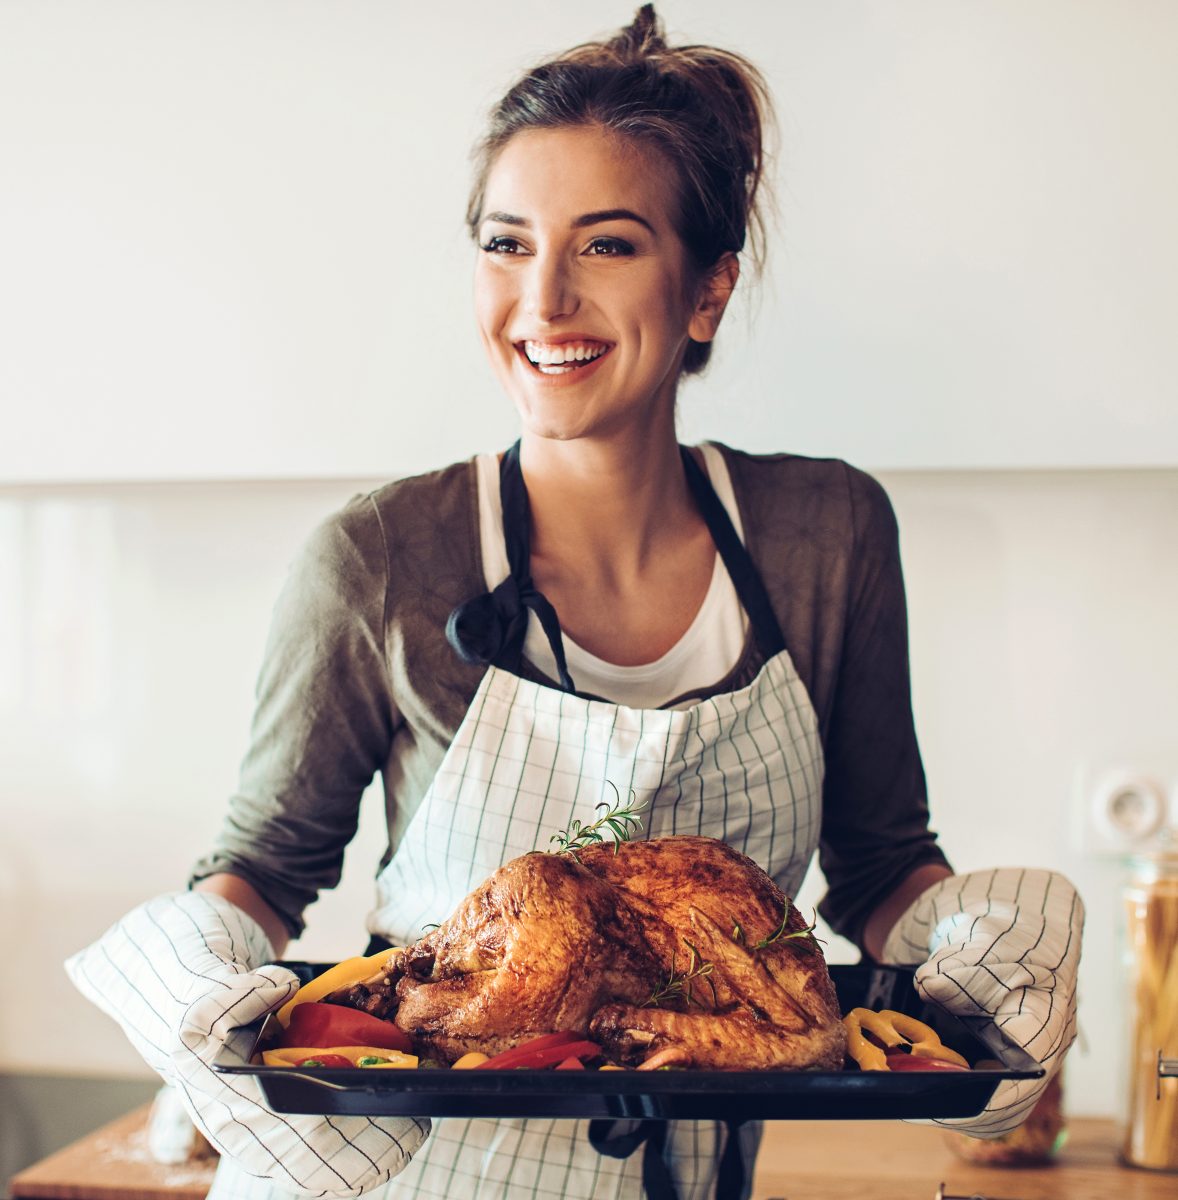 Food Safety Tips for your Holiday Meal